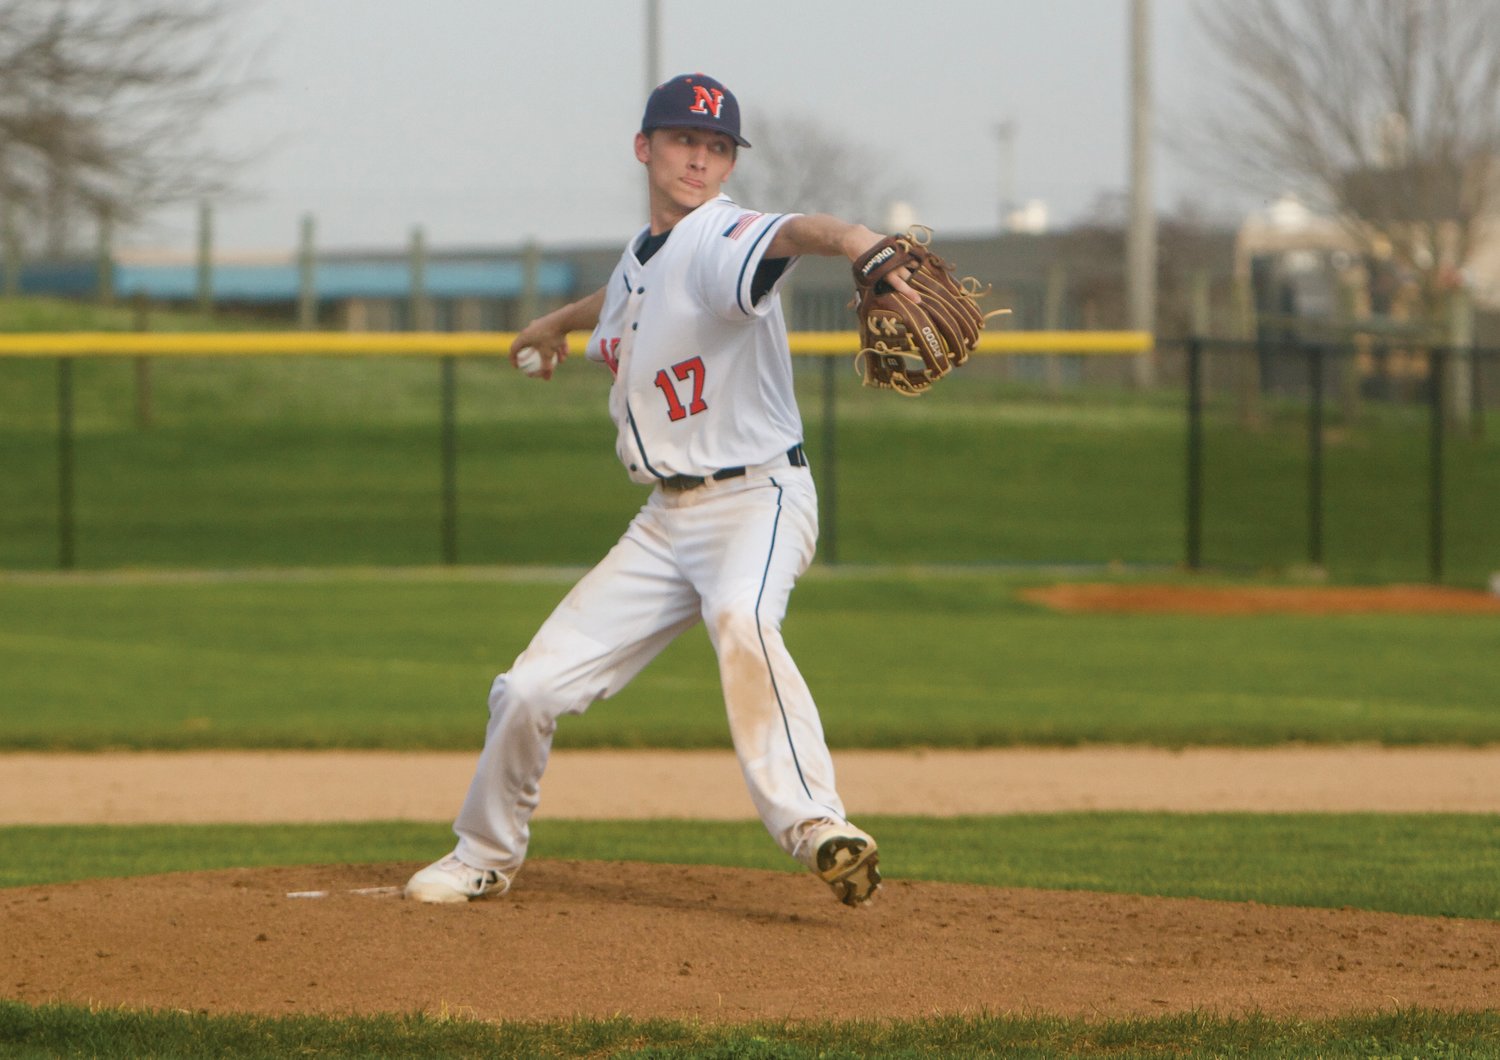 North Montgomery junior Jakob Kirsch tossed three innings, striking out seven, allowing one hit and no runs in an 18-0 win over North Putnam.